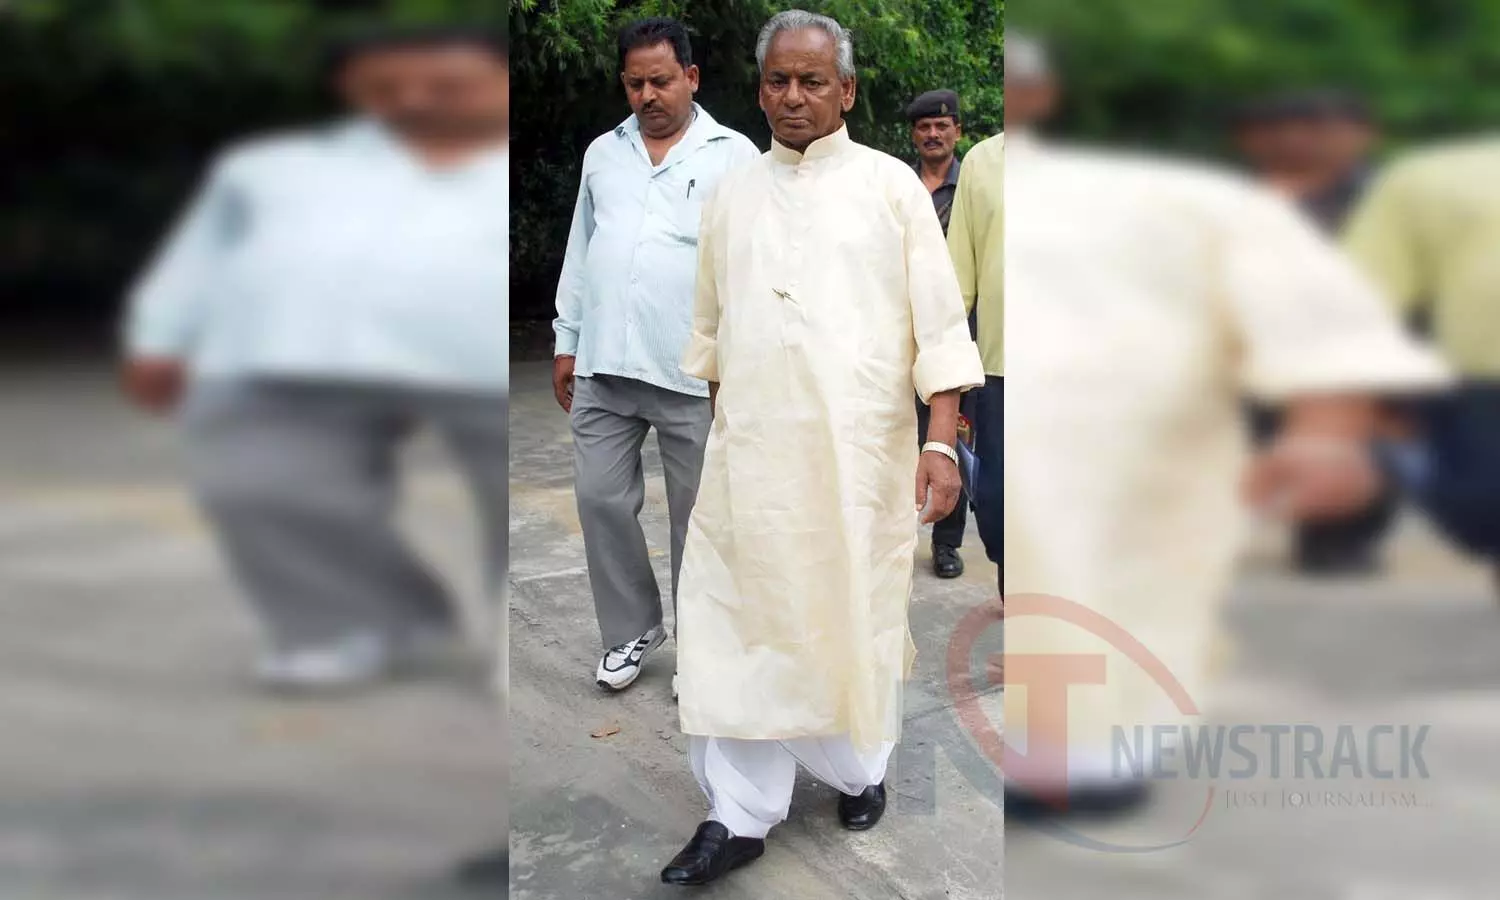 End of an Era: Kalyan Singh, Former Chief Minister of Uttar Pradesh and Former Governor of Rajasthan